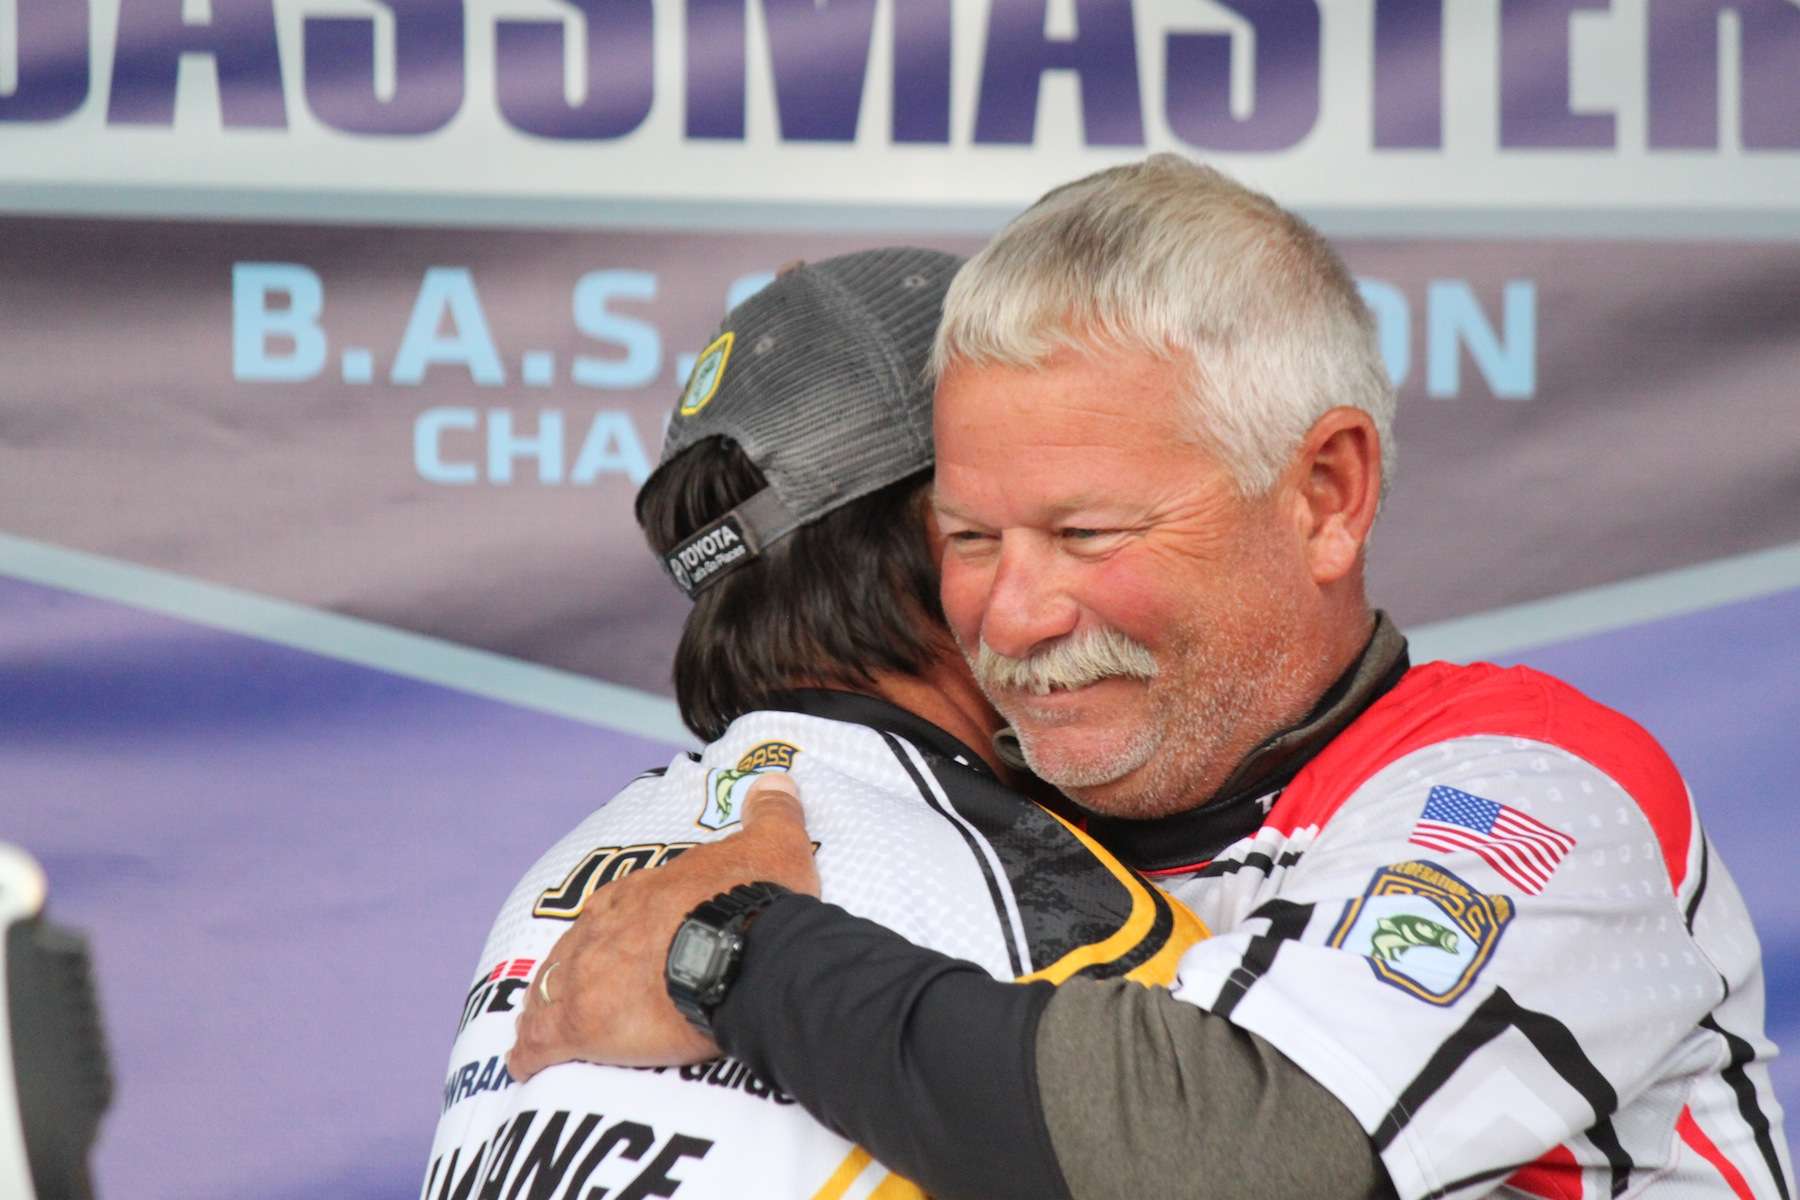 All Collins can do is congratulate Jones and mull over a missed opportunity with a 5-pounder on Day 2. 